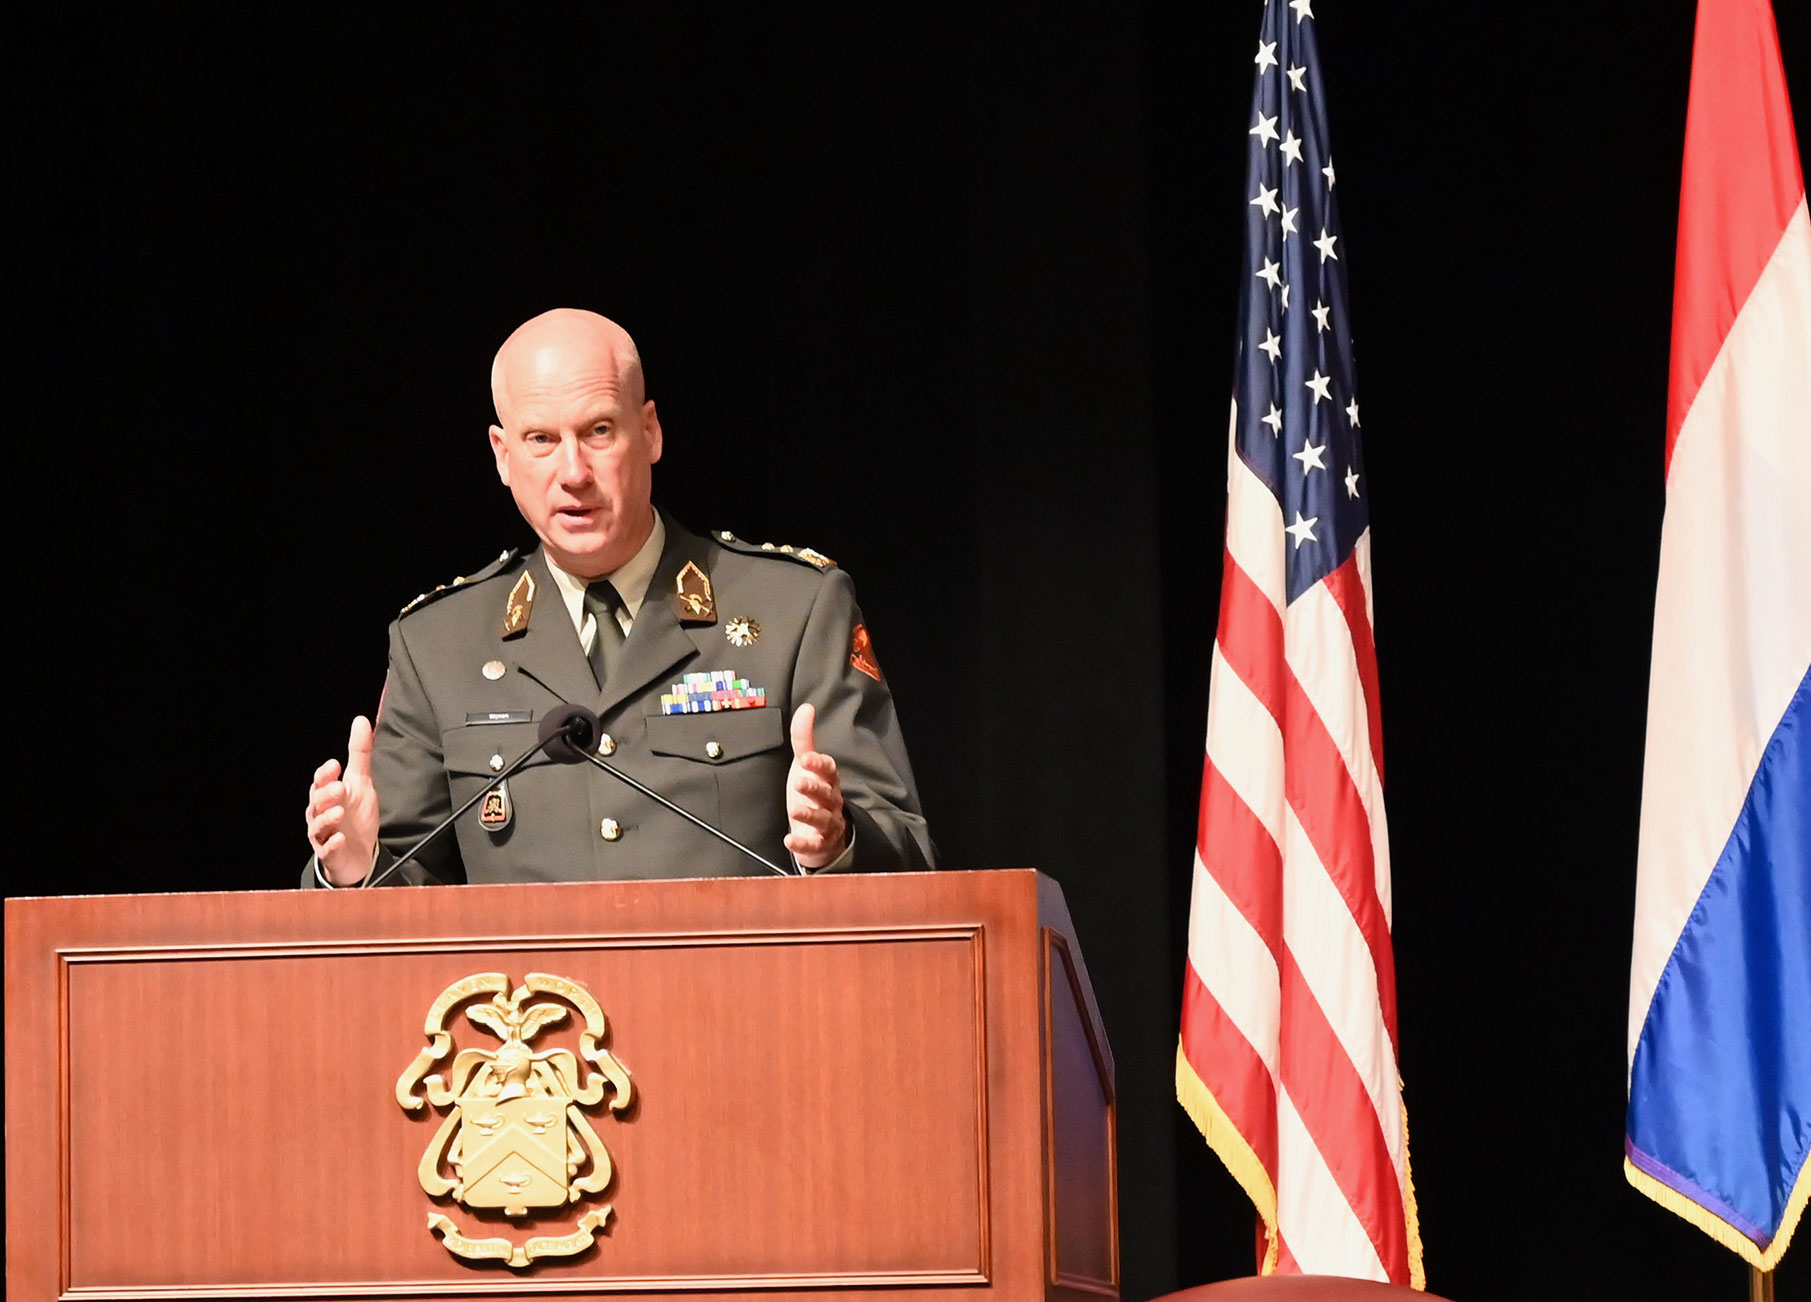 Lt. Gen. Martin Wijnen, Commander of the Royal Netherlands Army, delivers remarks after being inducted into the CGSC International Hall of Fame on April 12, 2022, at the Lewis and Clark Center, Fort Leavenworth, Kansas.